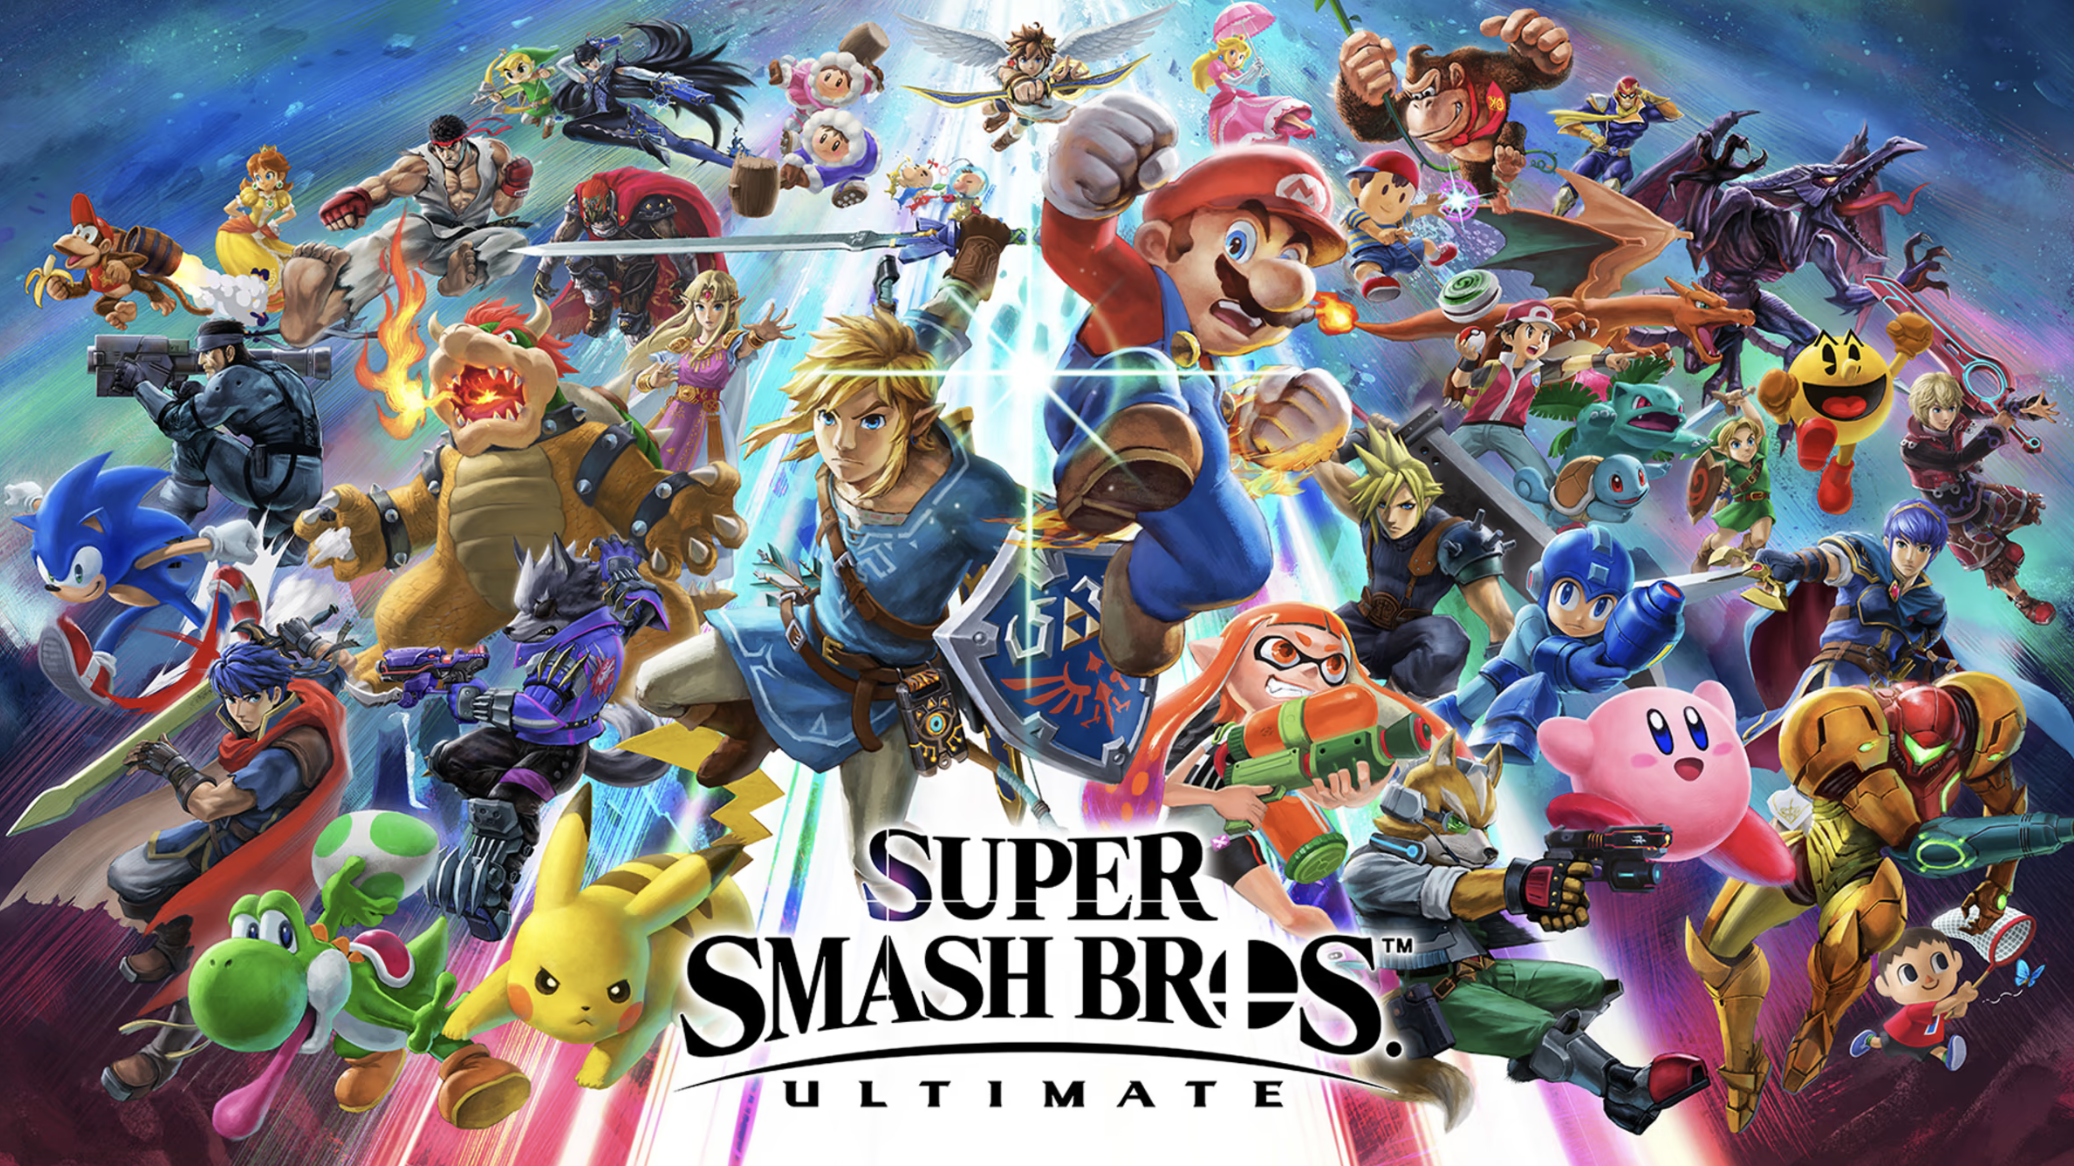 Image of the Super Smash Bros Ultimate loading screen with all the non DLC characters on it.